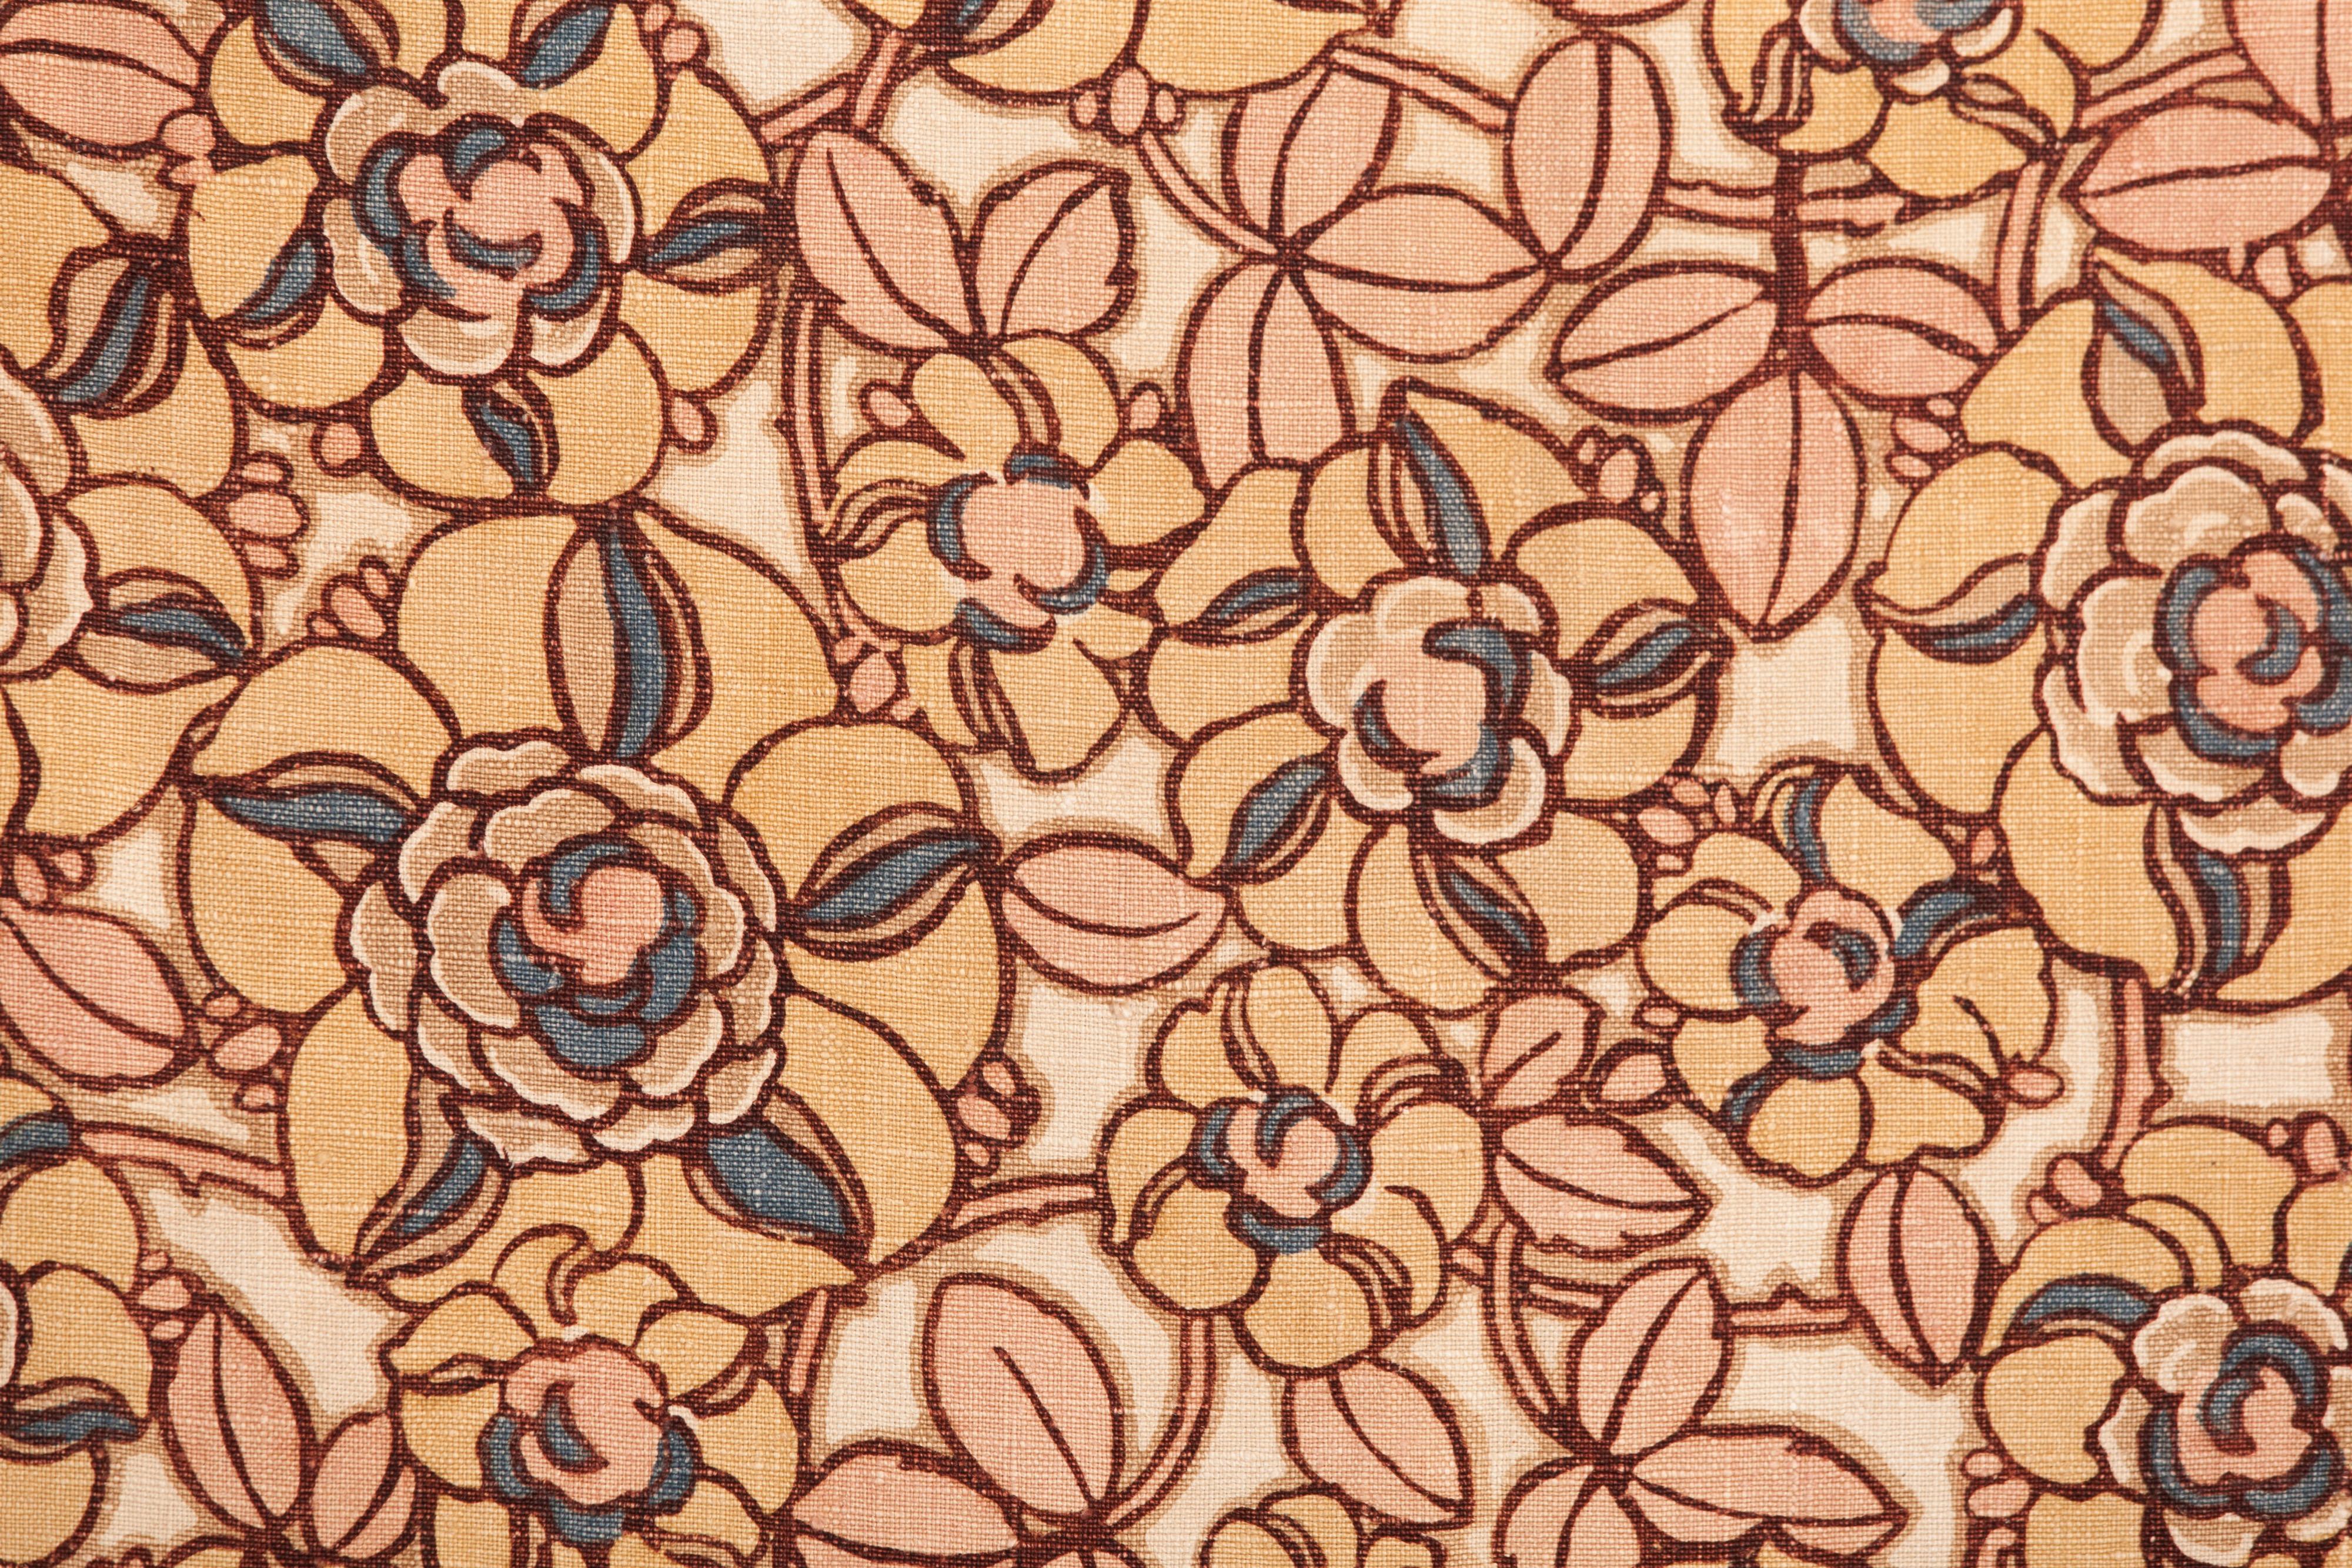 Evoking the stylized designs of the Wiener Werkstätte, this stenciled floral textile originated in Belgium. Note the playful arrangement and coloring of the florals and the snappy border.